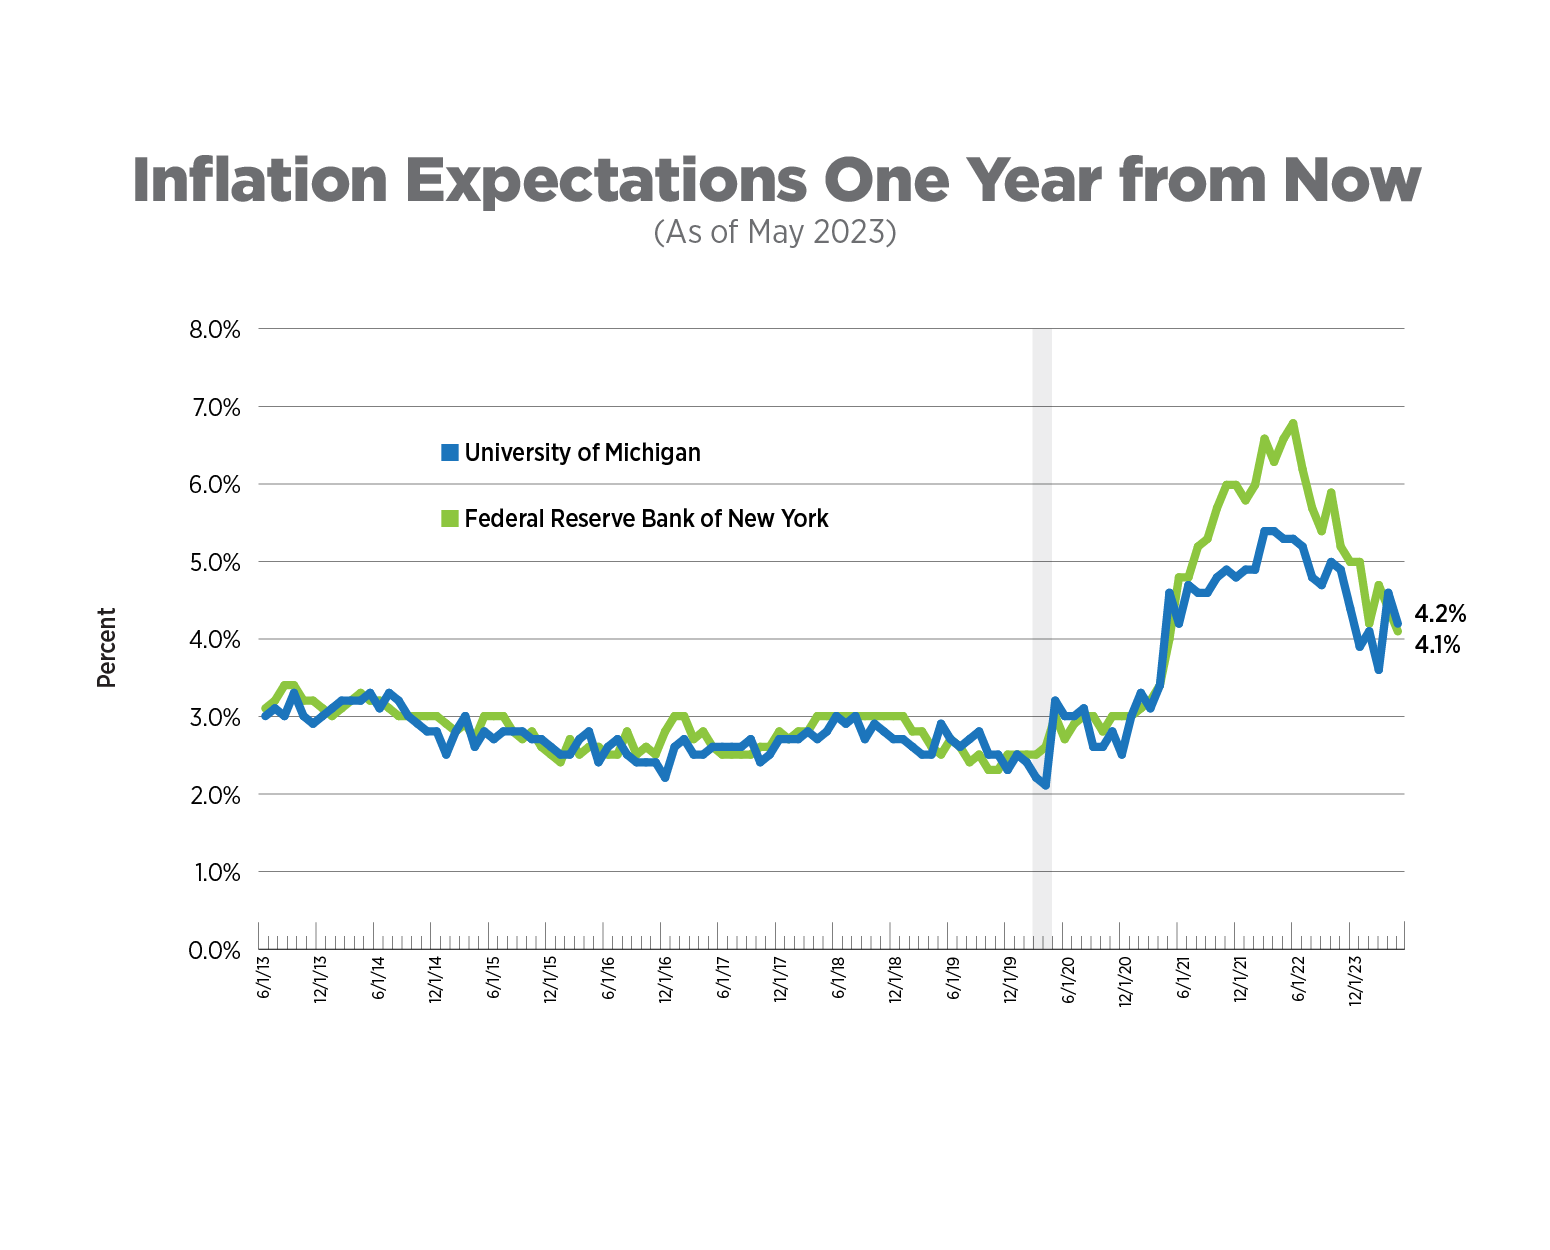 inflation expectations one year from now, as of may 2023